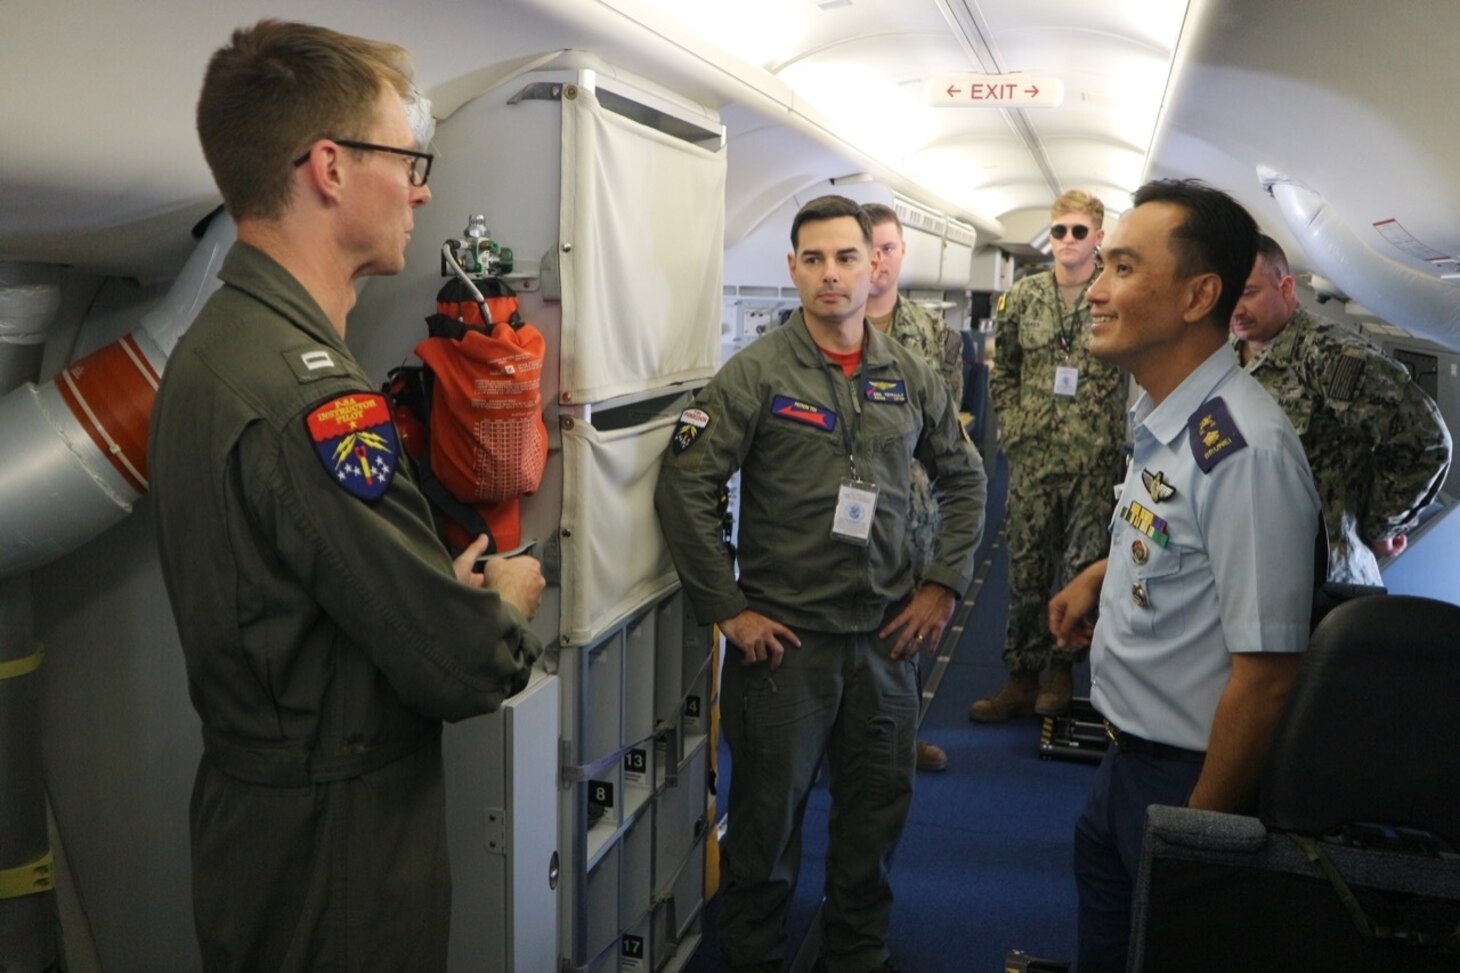 RIMBA AIR BASE, Brunei (Oct. 25, 2022) – Members of Combat Aircrew 9, assigned to the “Red Lancers” of Patrol Squadron (VP) 10, participate in an information exchange with members of the Royal Brunei Armed Forces during Cooperation Afloat Readiness and Training Brunei 2022. VP-10 is currently operating from Kadena Air Base in Okinawa, Japan. The squadron conducts maritime patrol and reconnaissance, as well as theater outreach operations, as part of a rotational deployment to the U.S. 7th Fleet area of operations. (U.S. Navy photo by Aviation Electrician’s Mate 1st Class Brian Woodford)